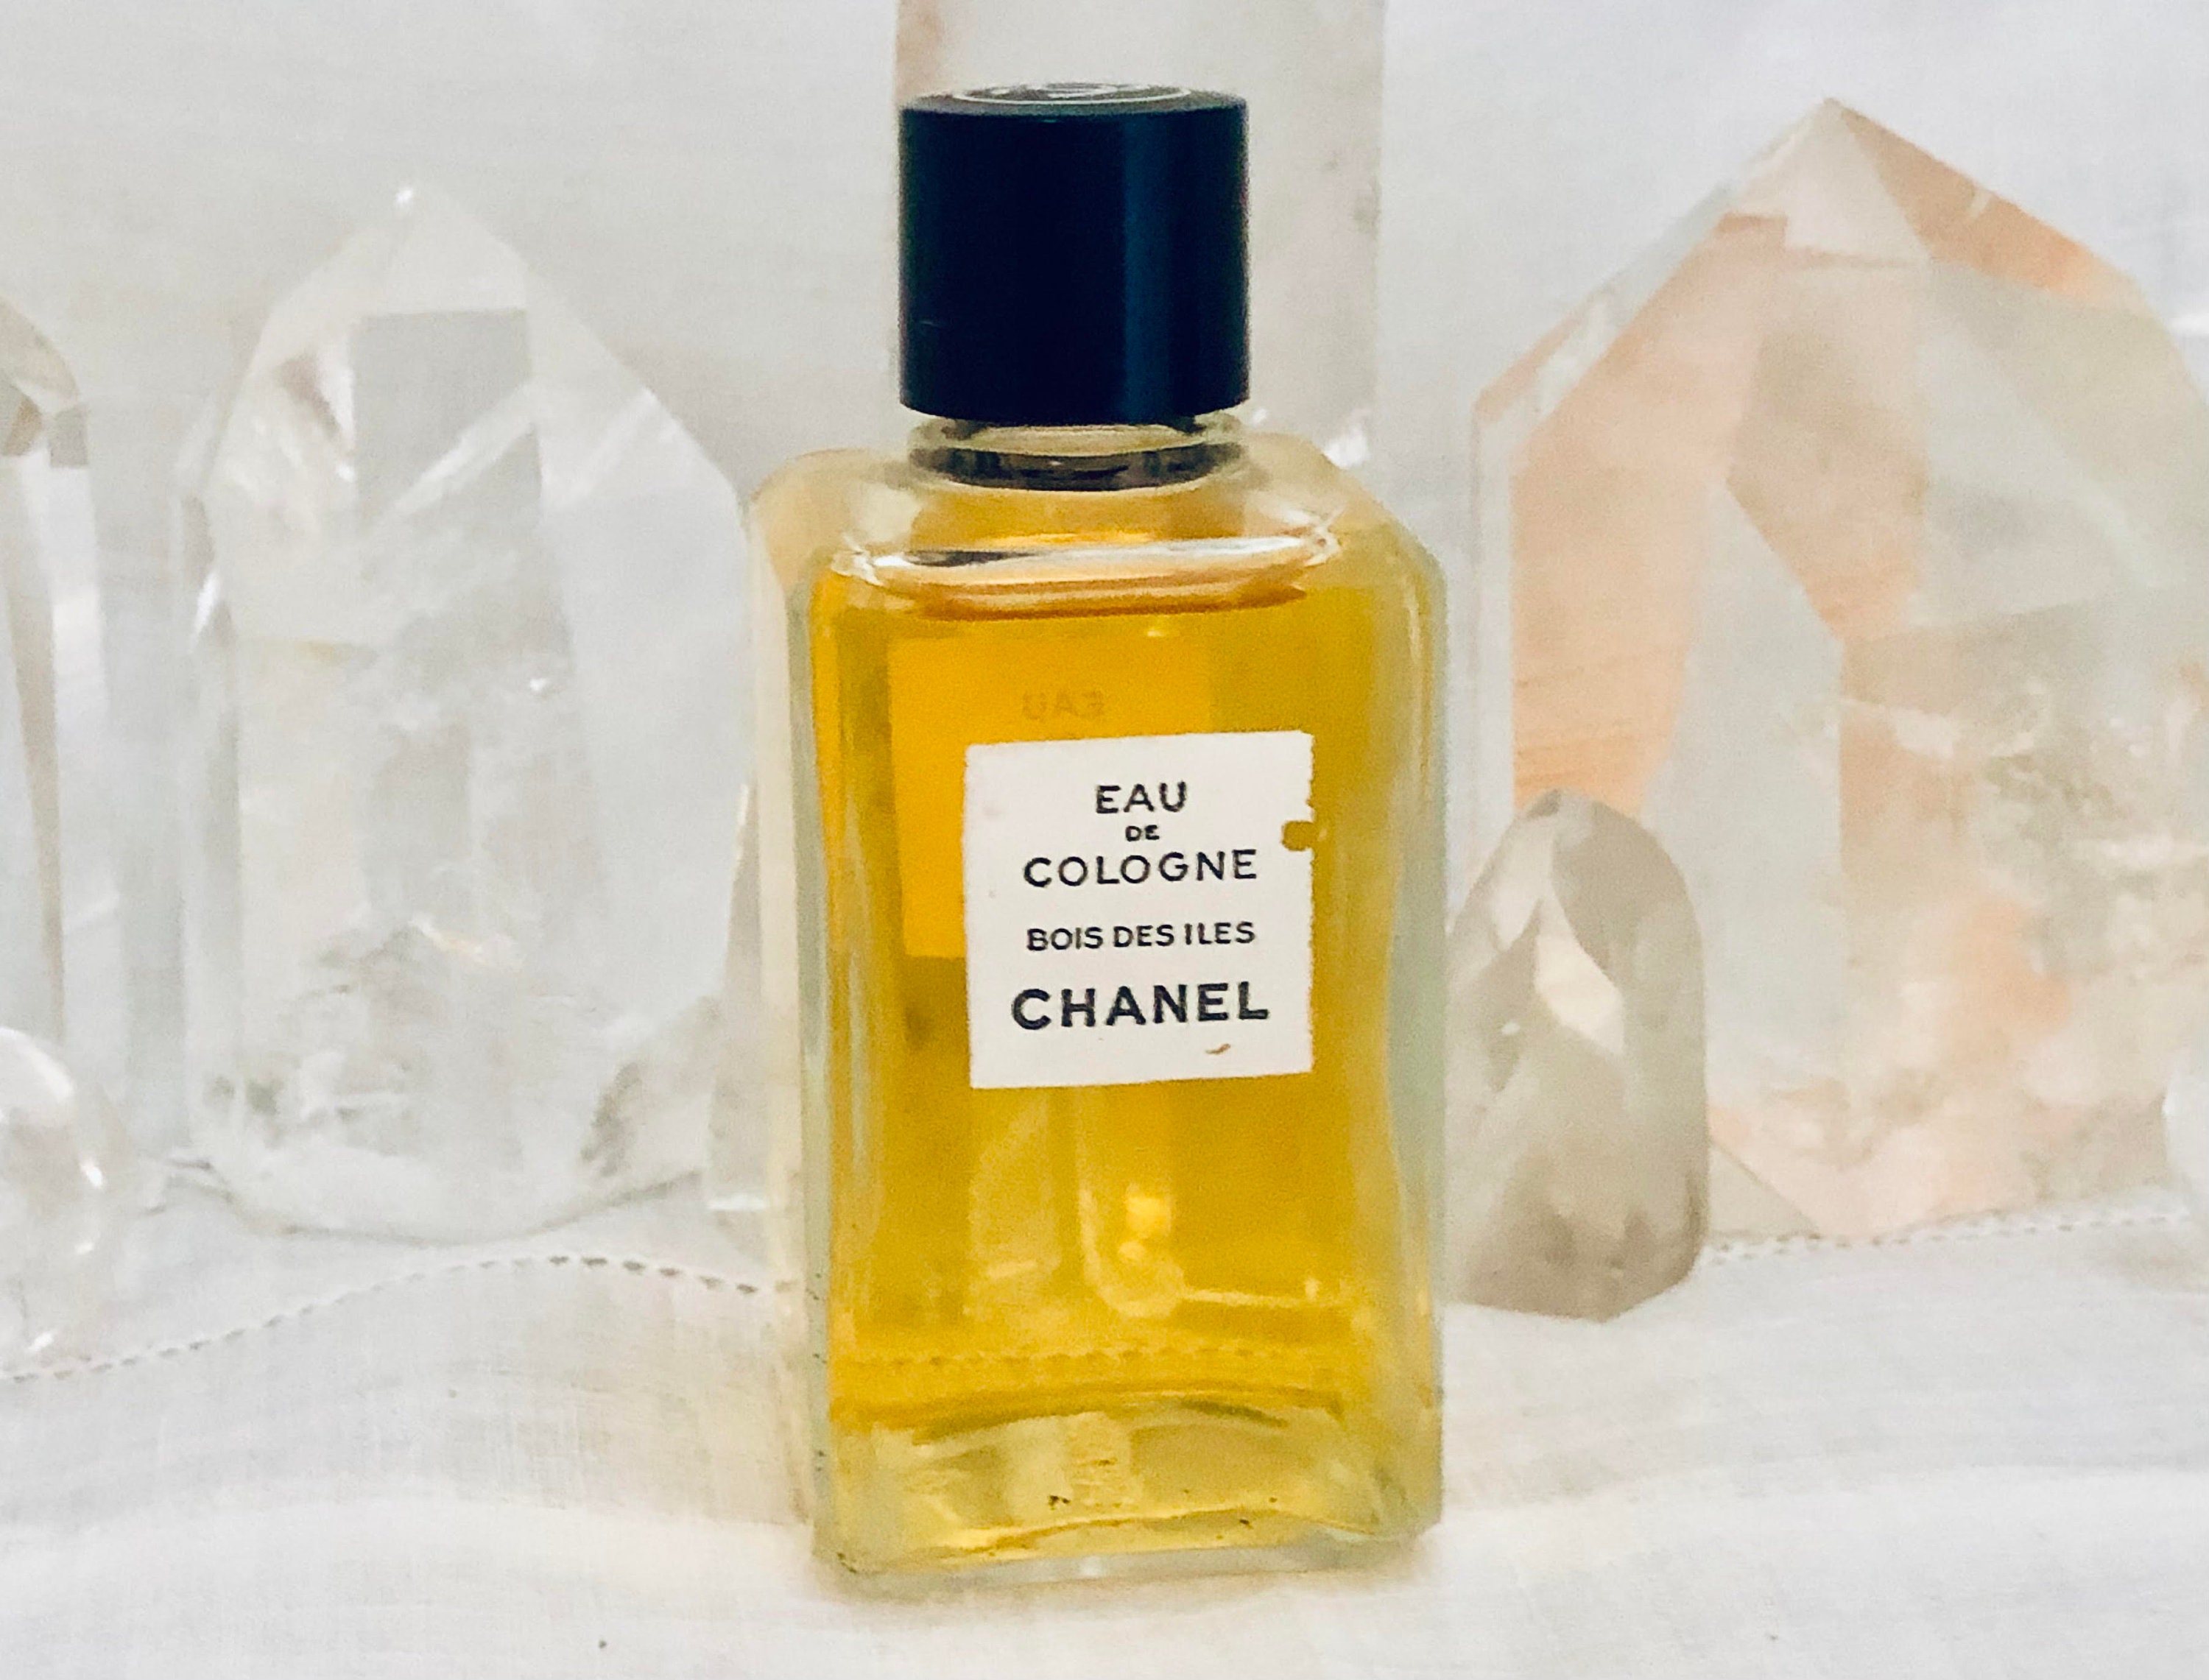 Chanel No. 5 - Has it had its day? - SCENTGOURMAND